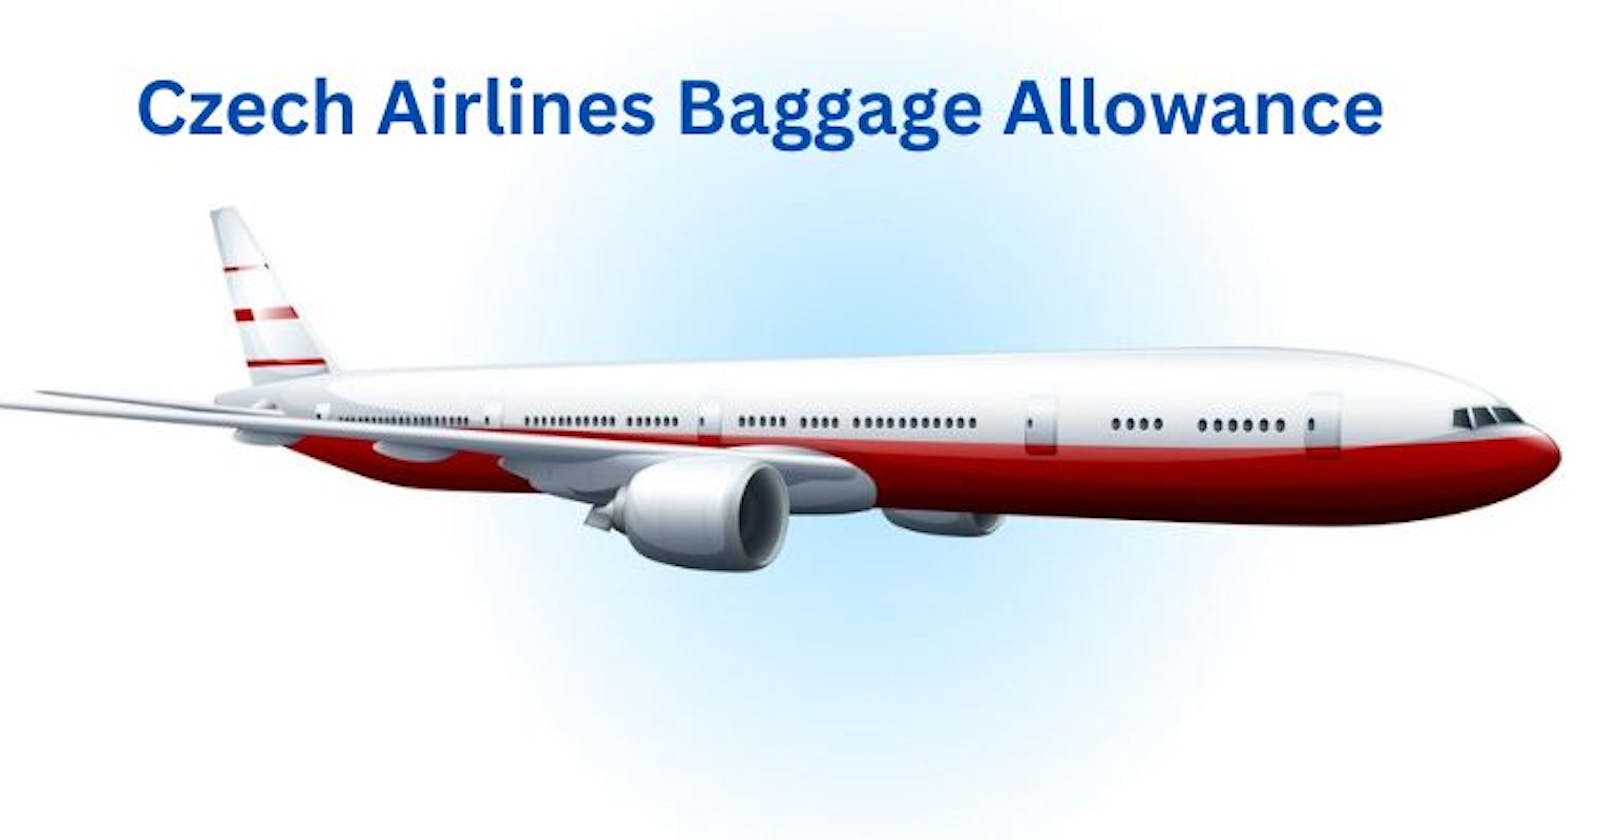 What is the Czech Airlines Rules for Baggage Allowance?